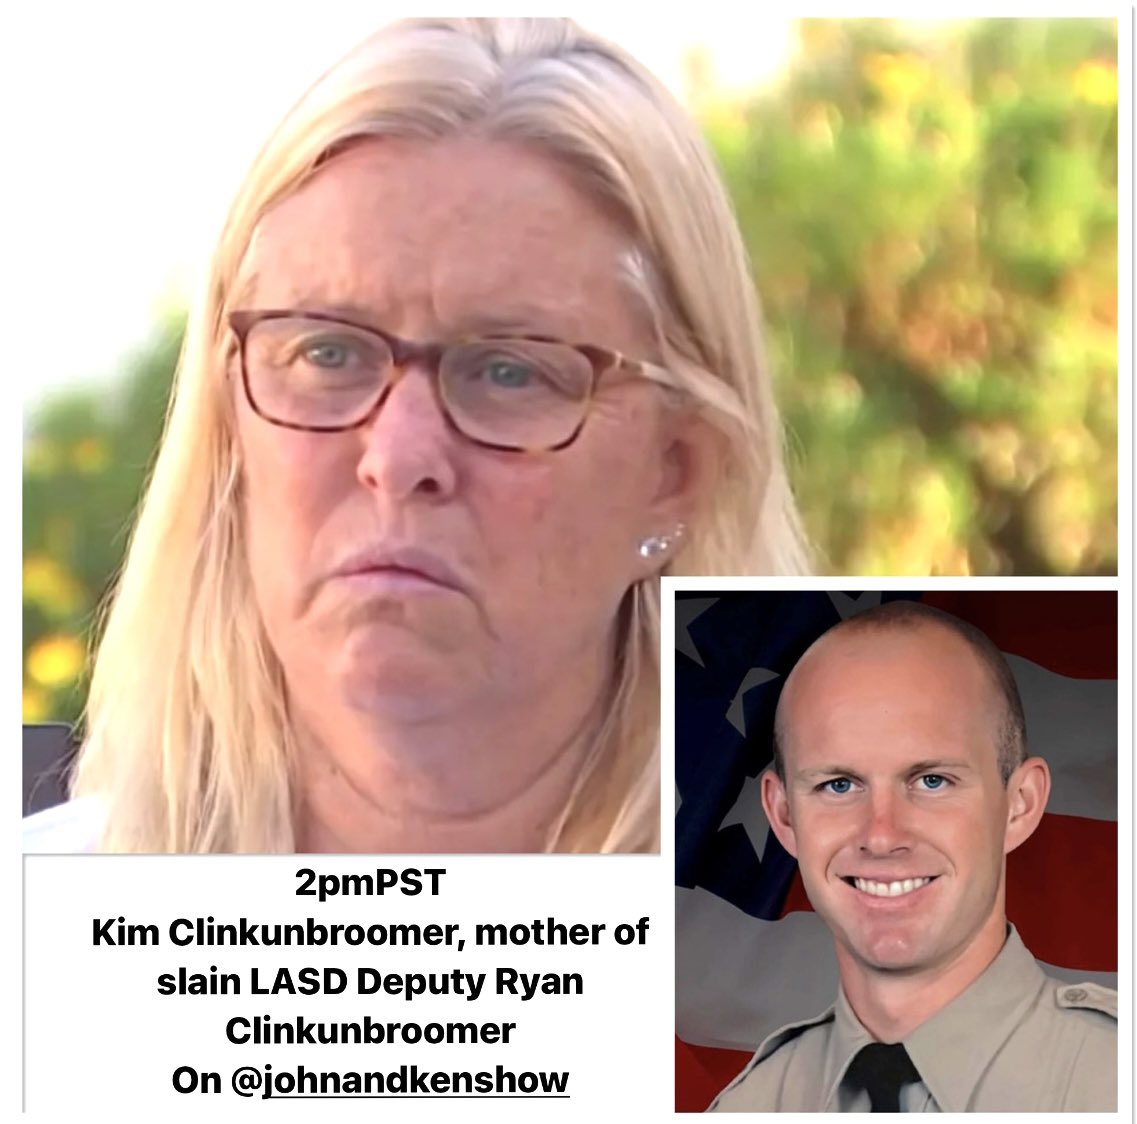 Kim Clinkunbroomer, mom of slain @LASDHQ Deputy Ryan Clinkunbroomer, talks with @johnandkenshow at 2pmPST, and remains devastated the @ladaoffice isn't pursuing death penalty. Please join us LIVE on @kfiam640 and anytime on our @iheartradio #podcast.